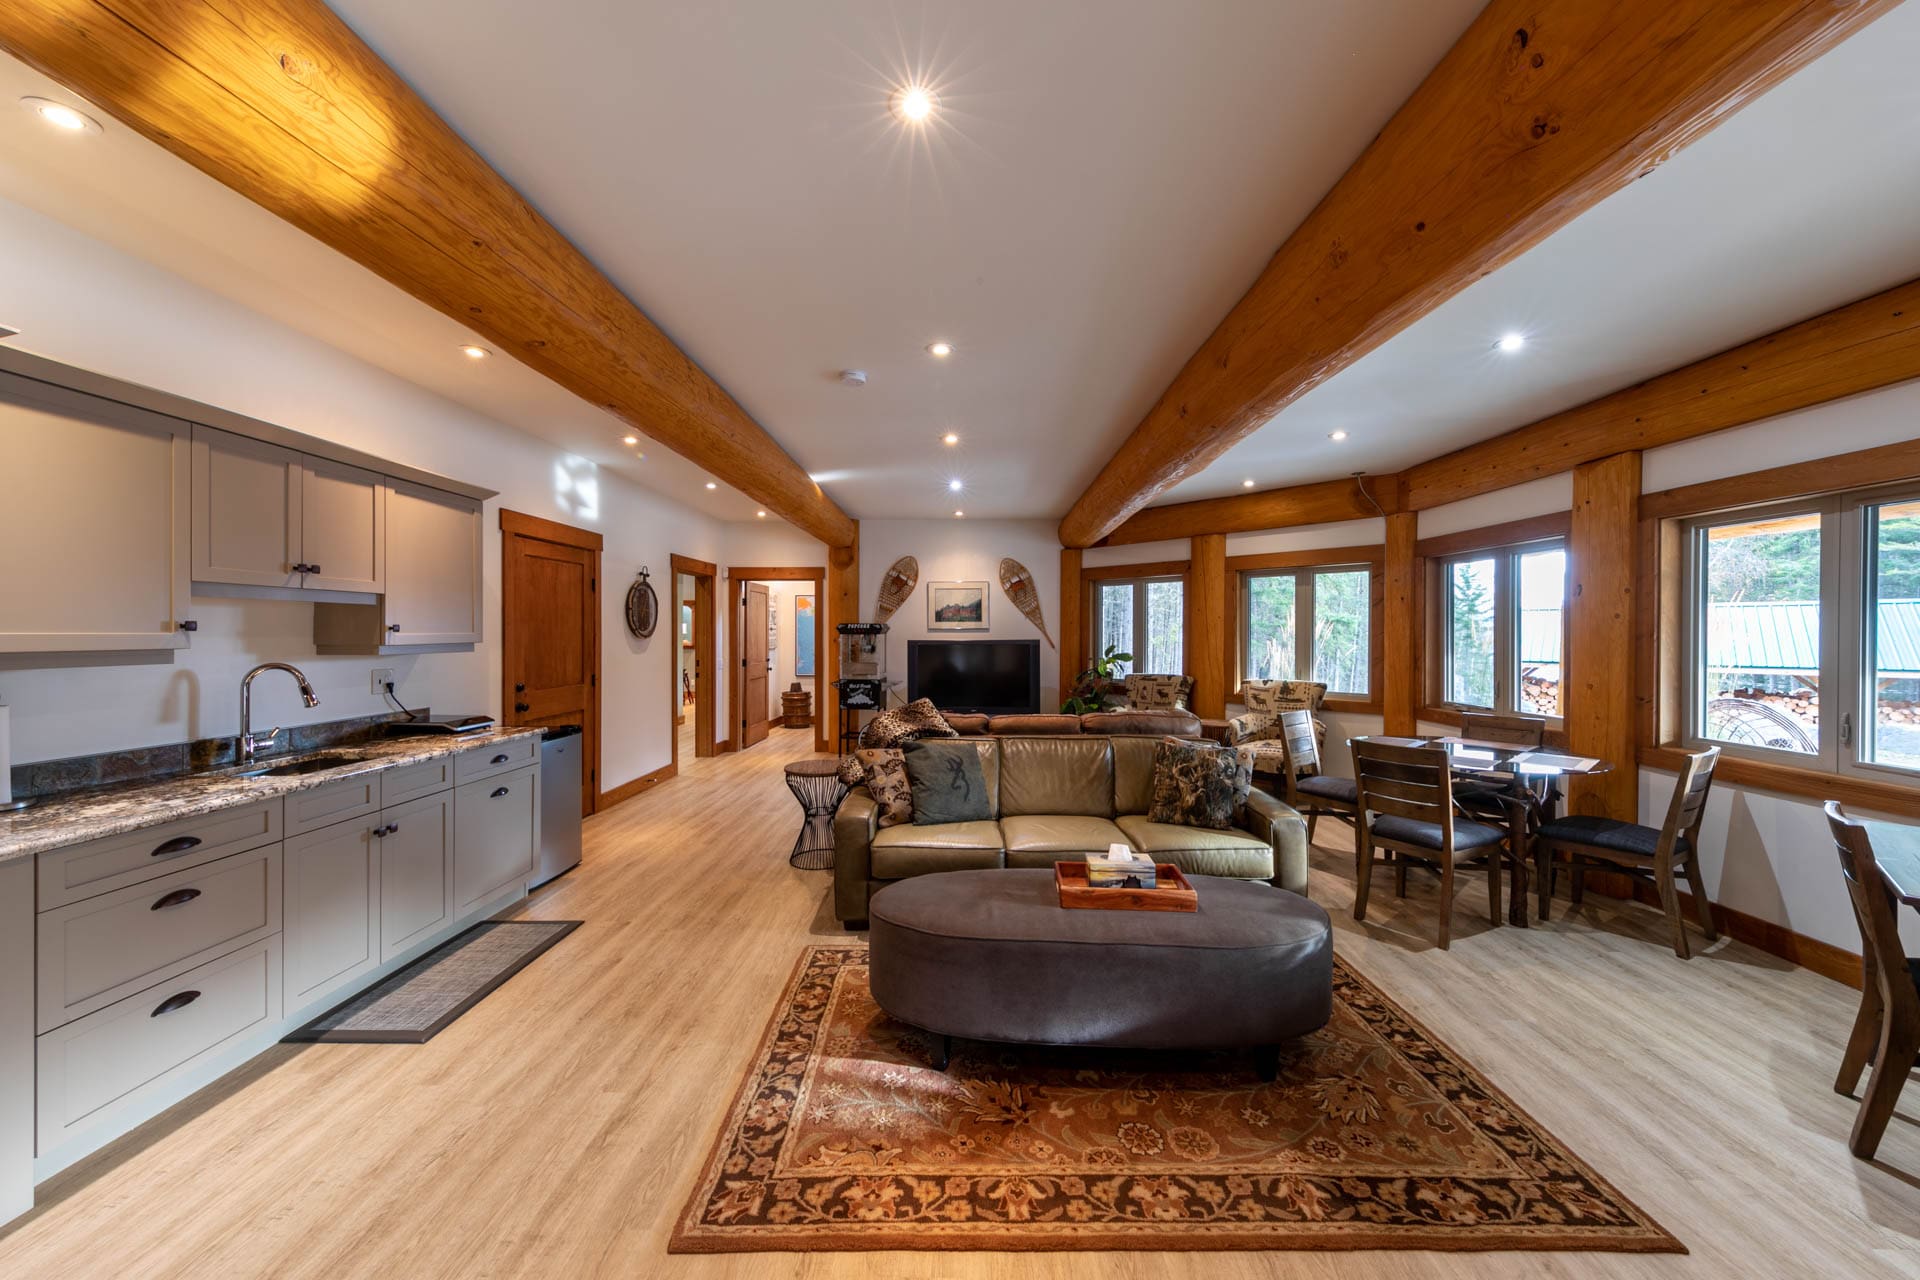 kitchen and living area of post and beam log home.